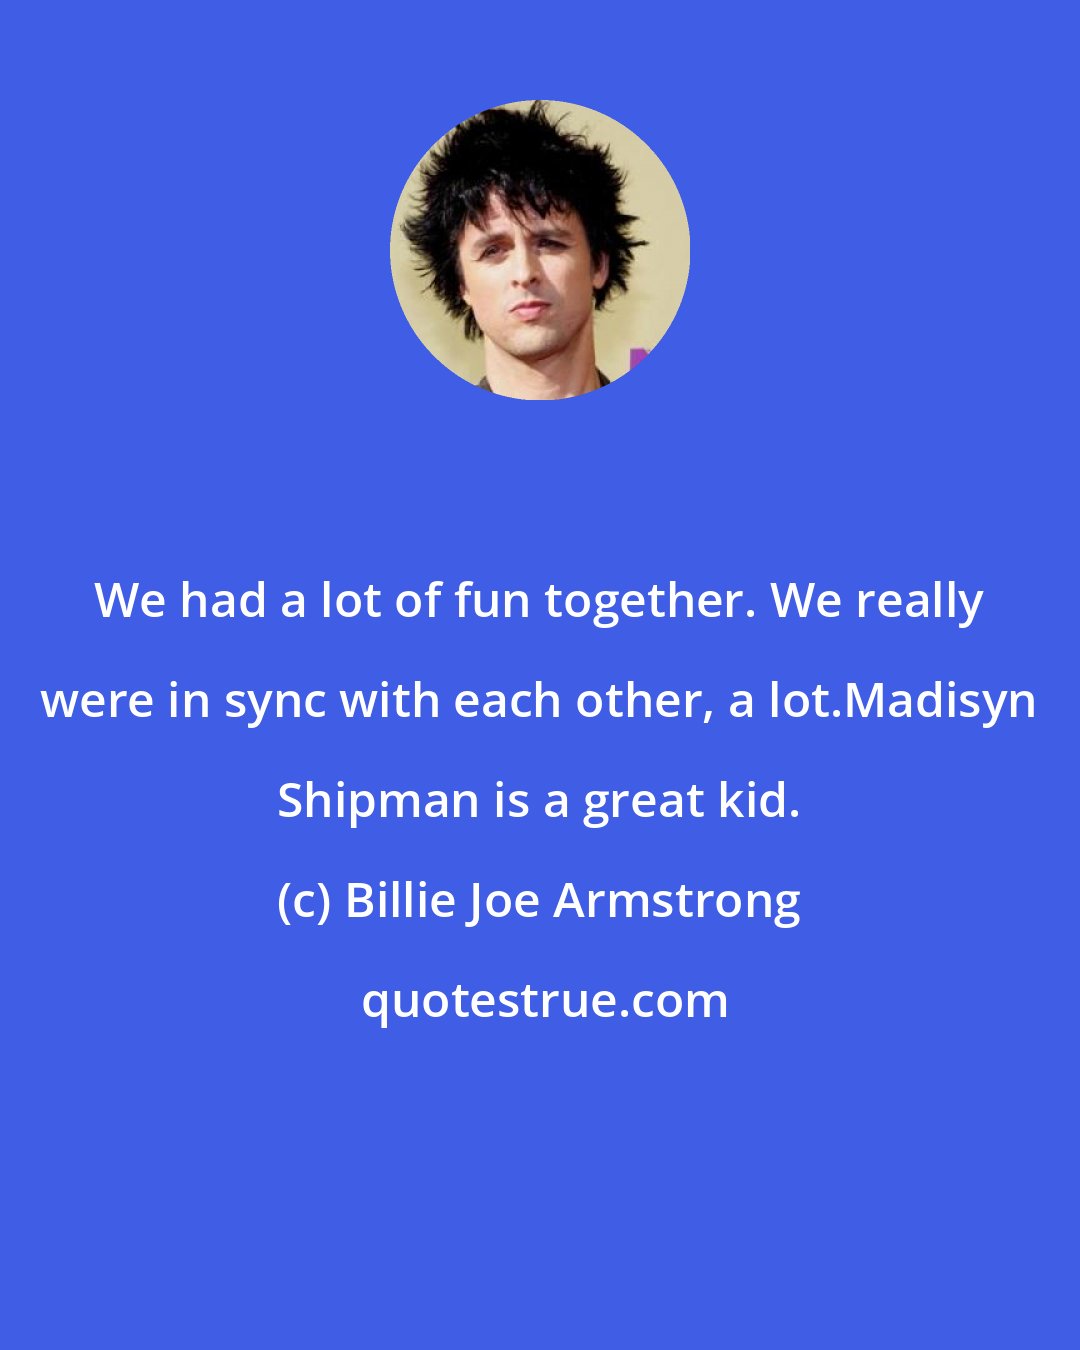 Billie Joe Armstrong: We had a lot of fun together. We really were in sync with each other, a lot.Madisyn Shipman is a great kid.